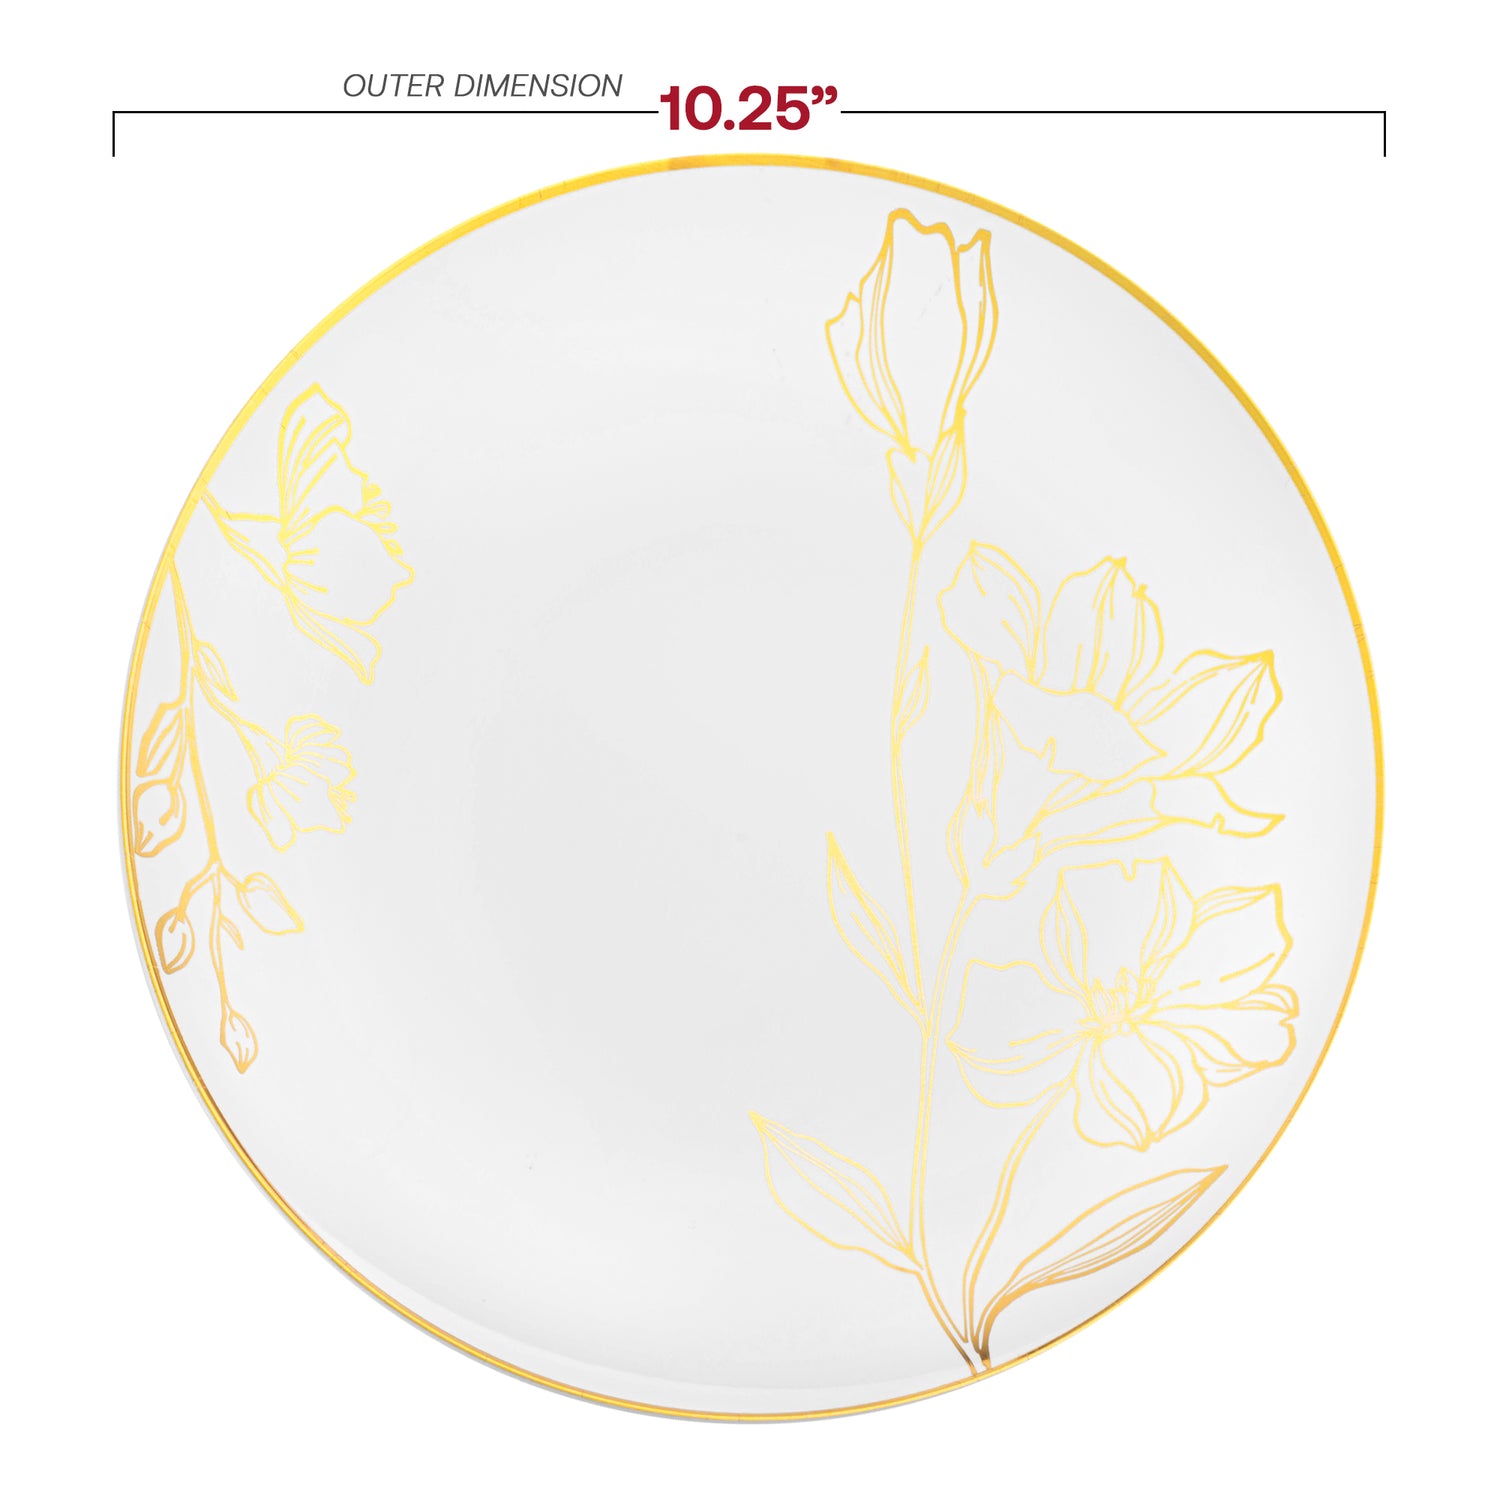 White with Gold Antique Floral Round Disposable Plastic Dinner Plates (10.25") Dimension | The Kaya Collection